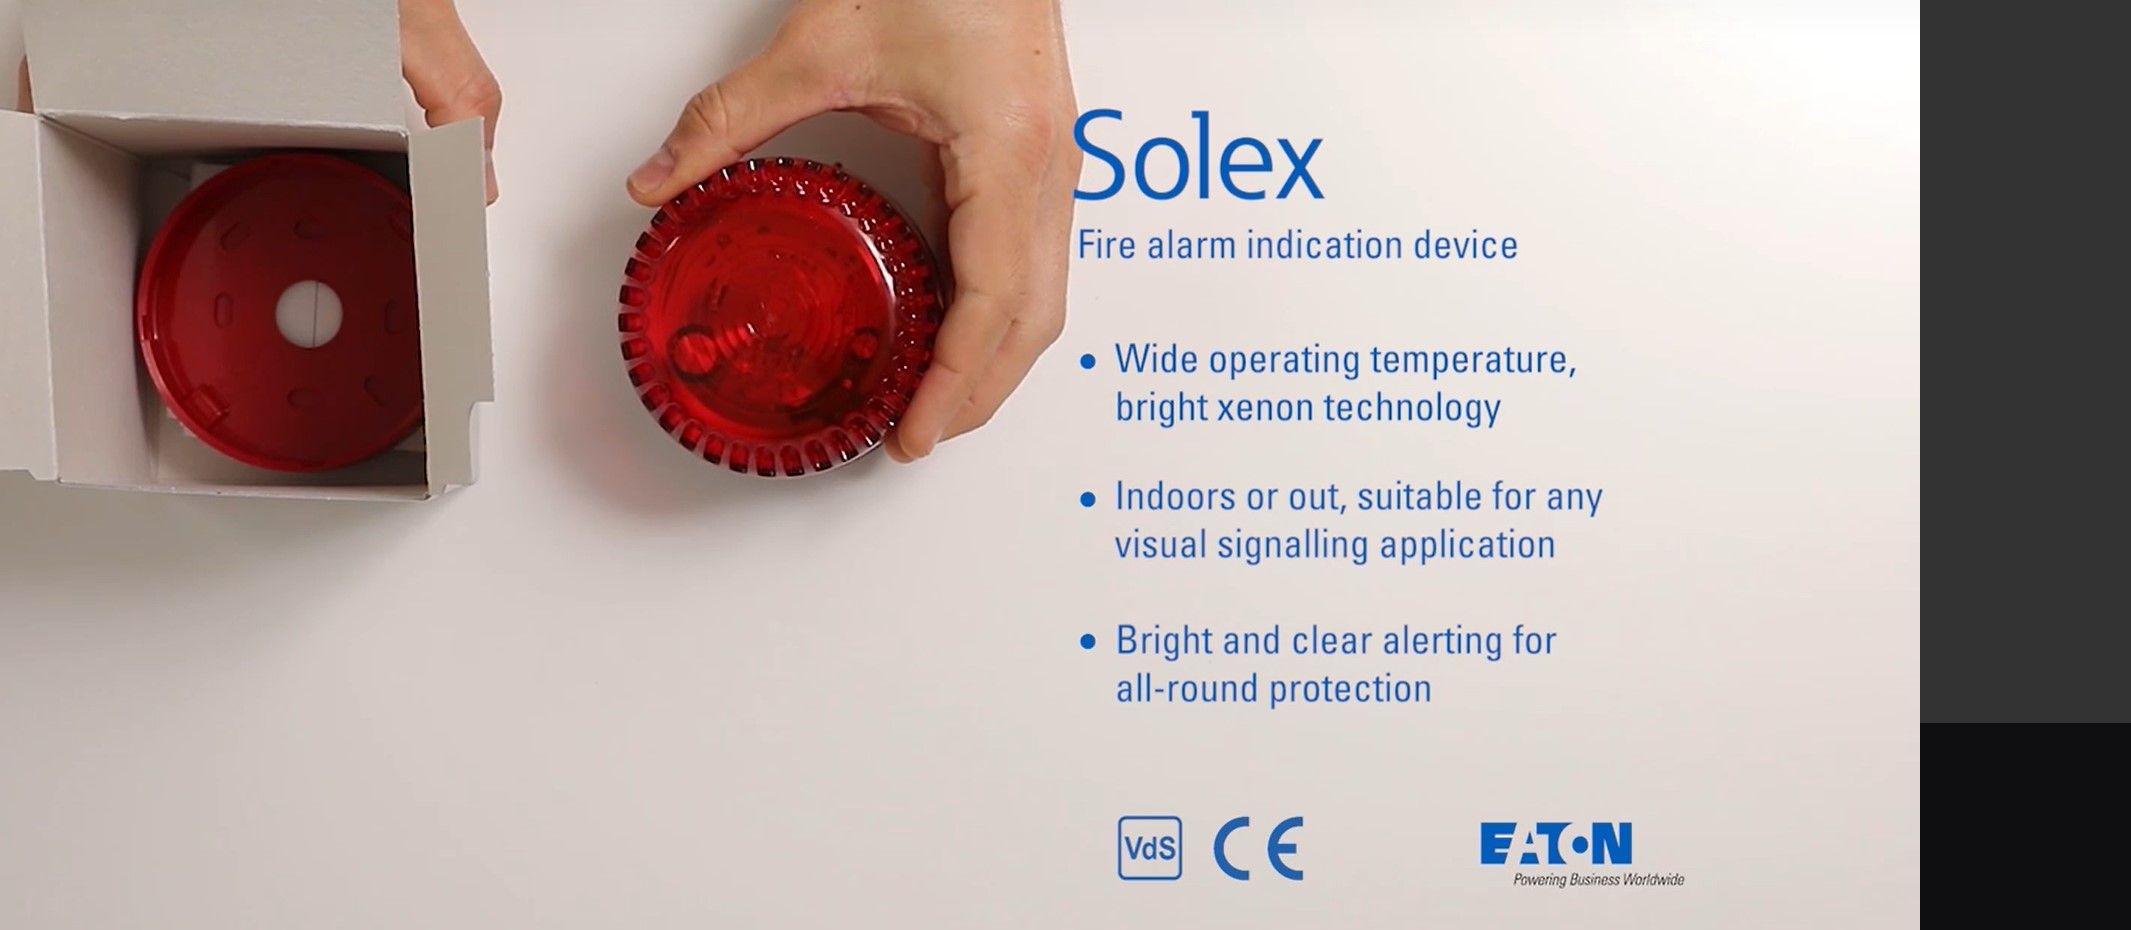 Unboxing the Solex fire alarm indication device